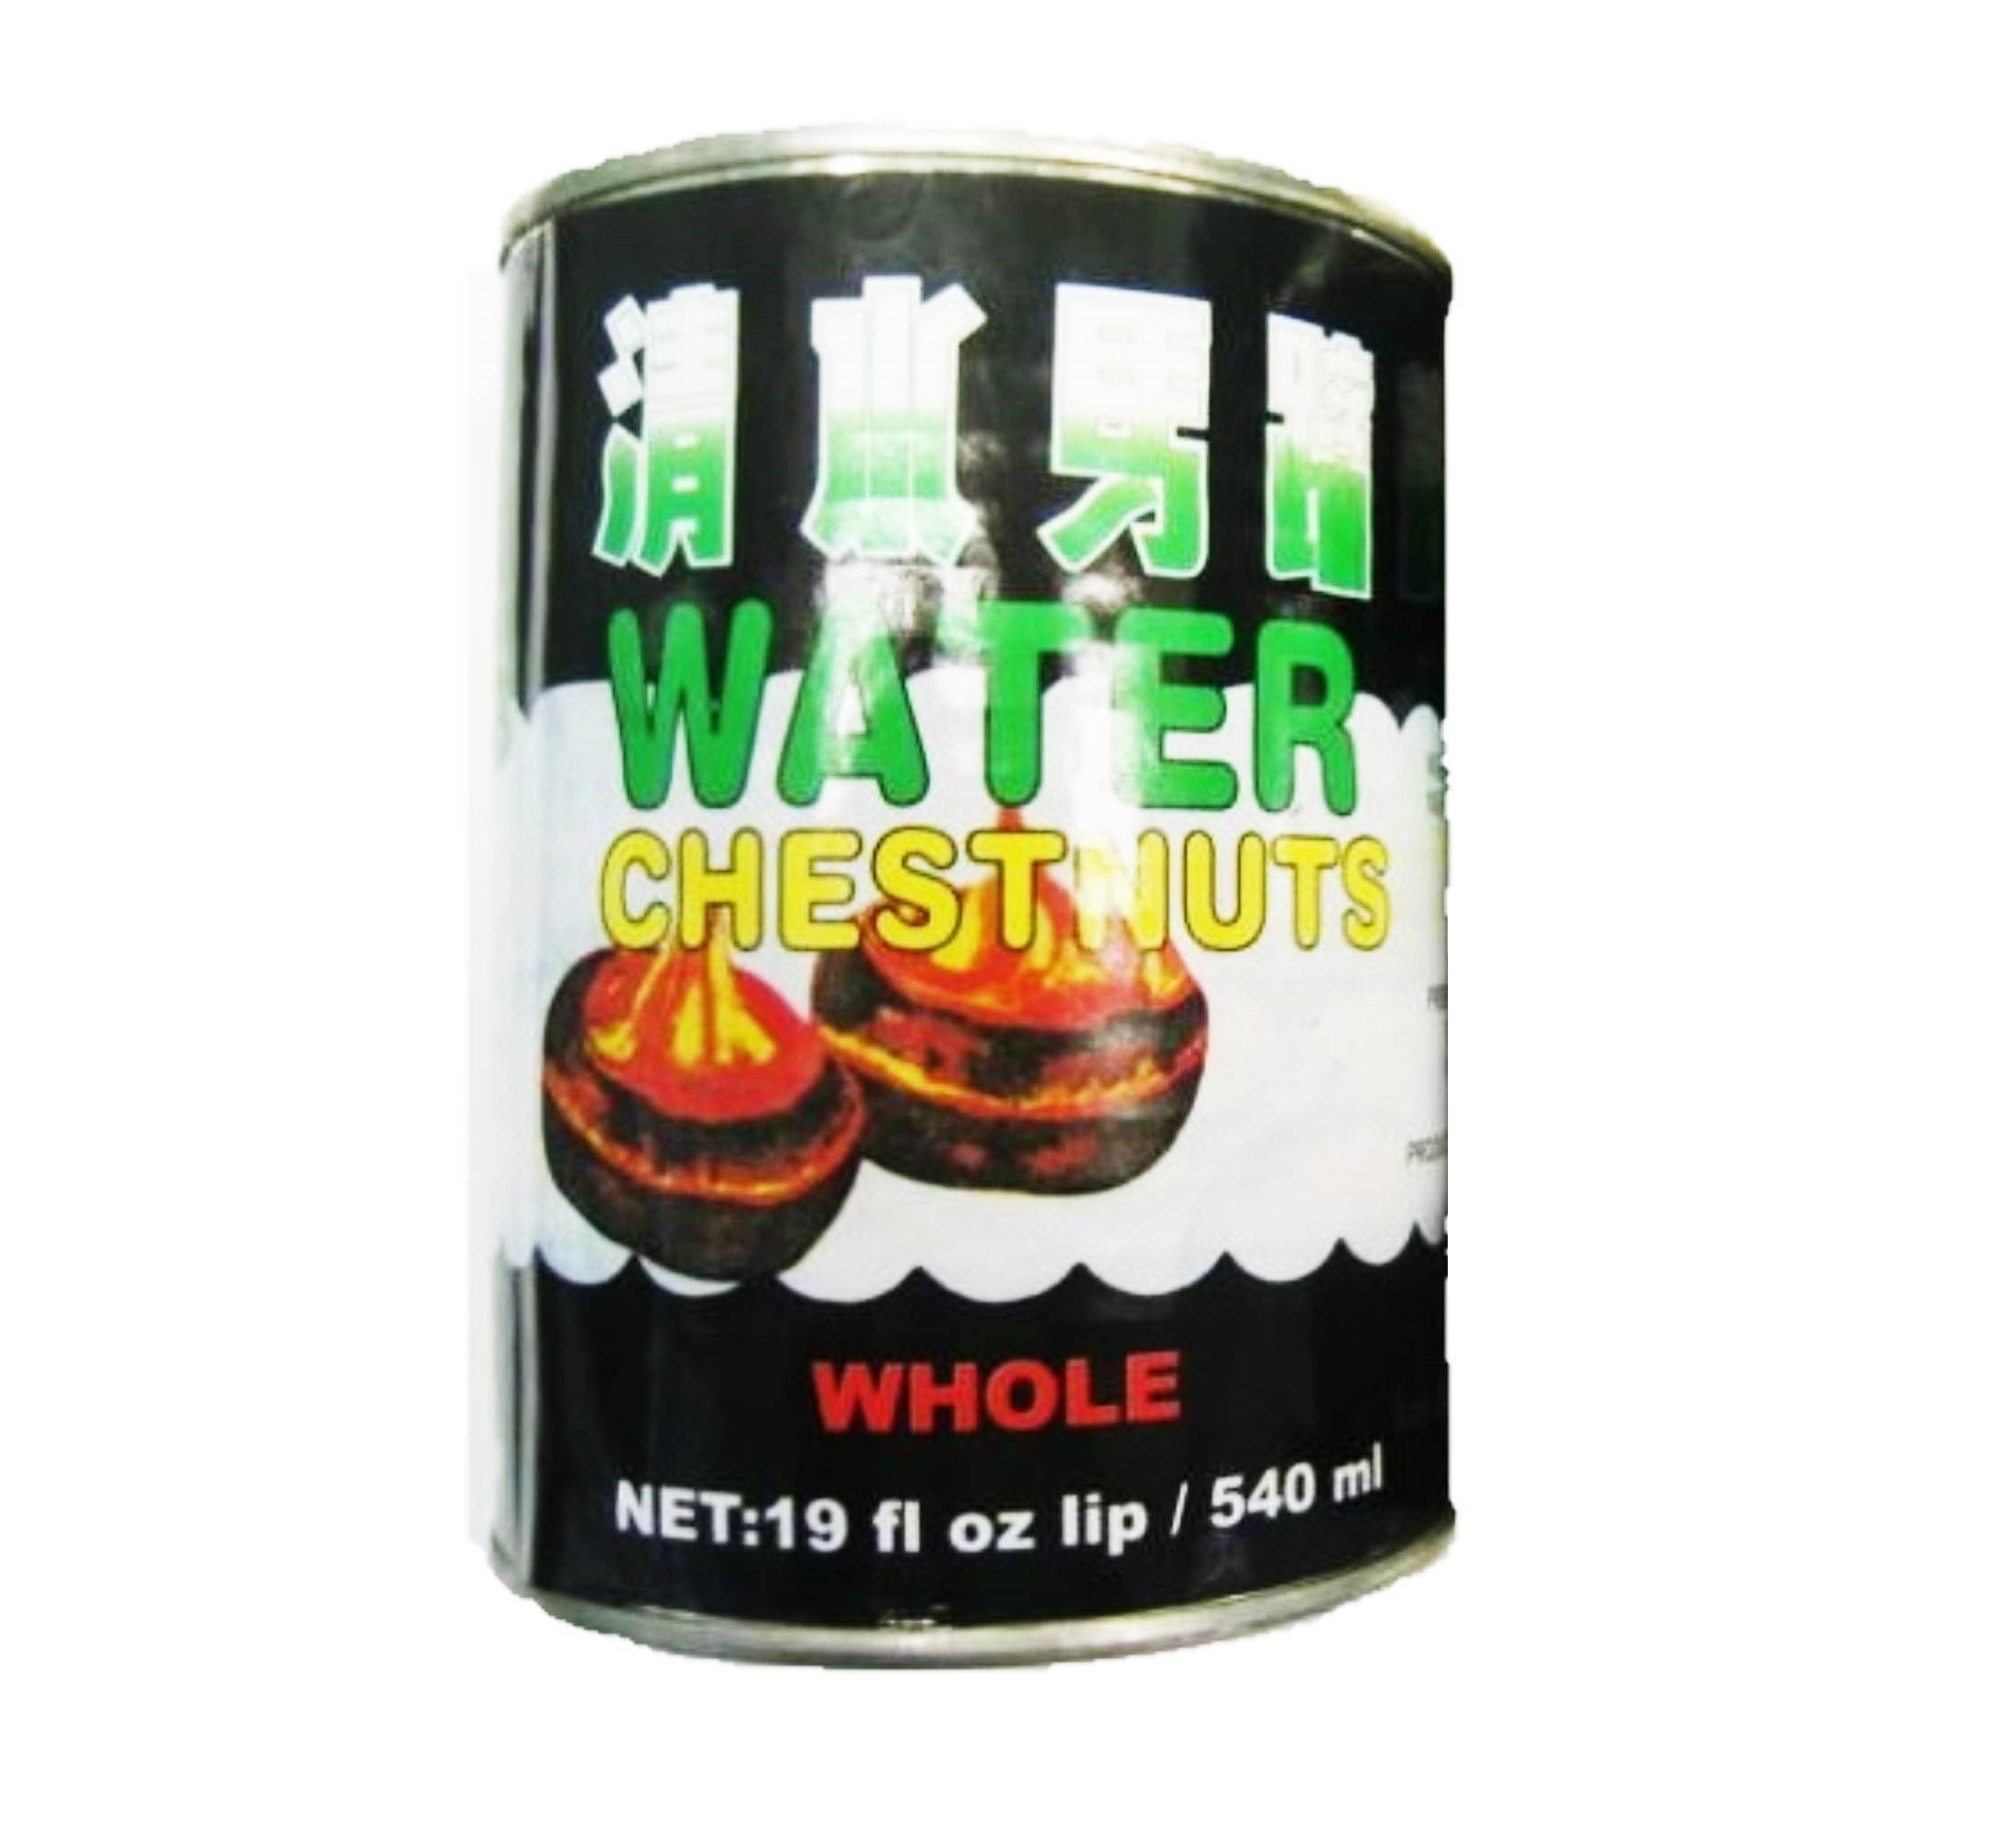 CHEN CHEN WATER CHESTNUTS WHOLE AG116011